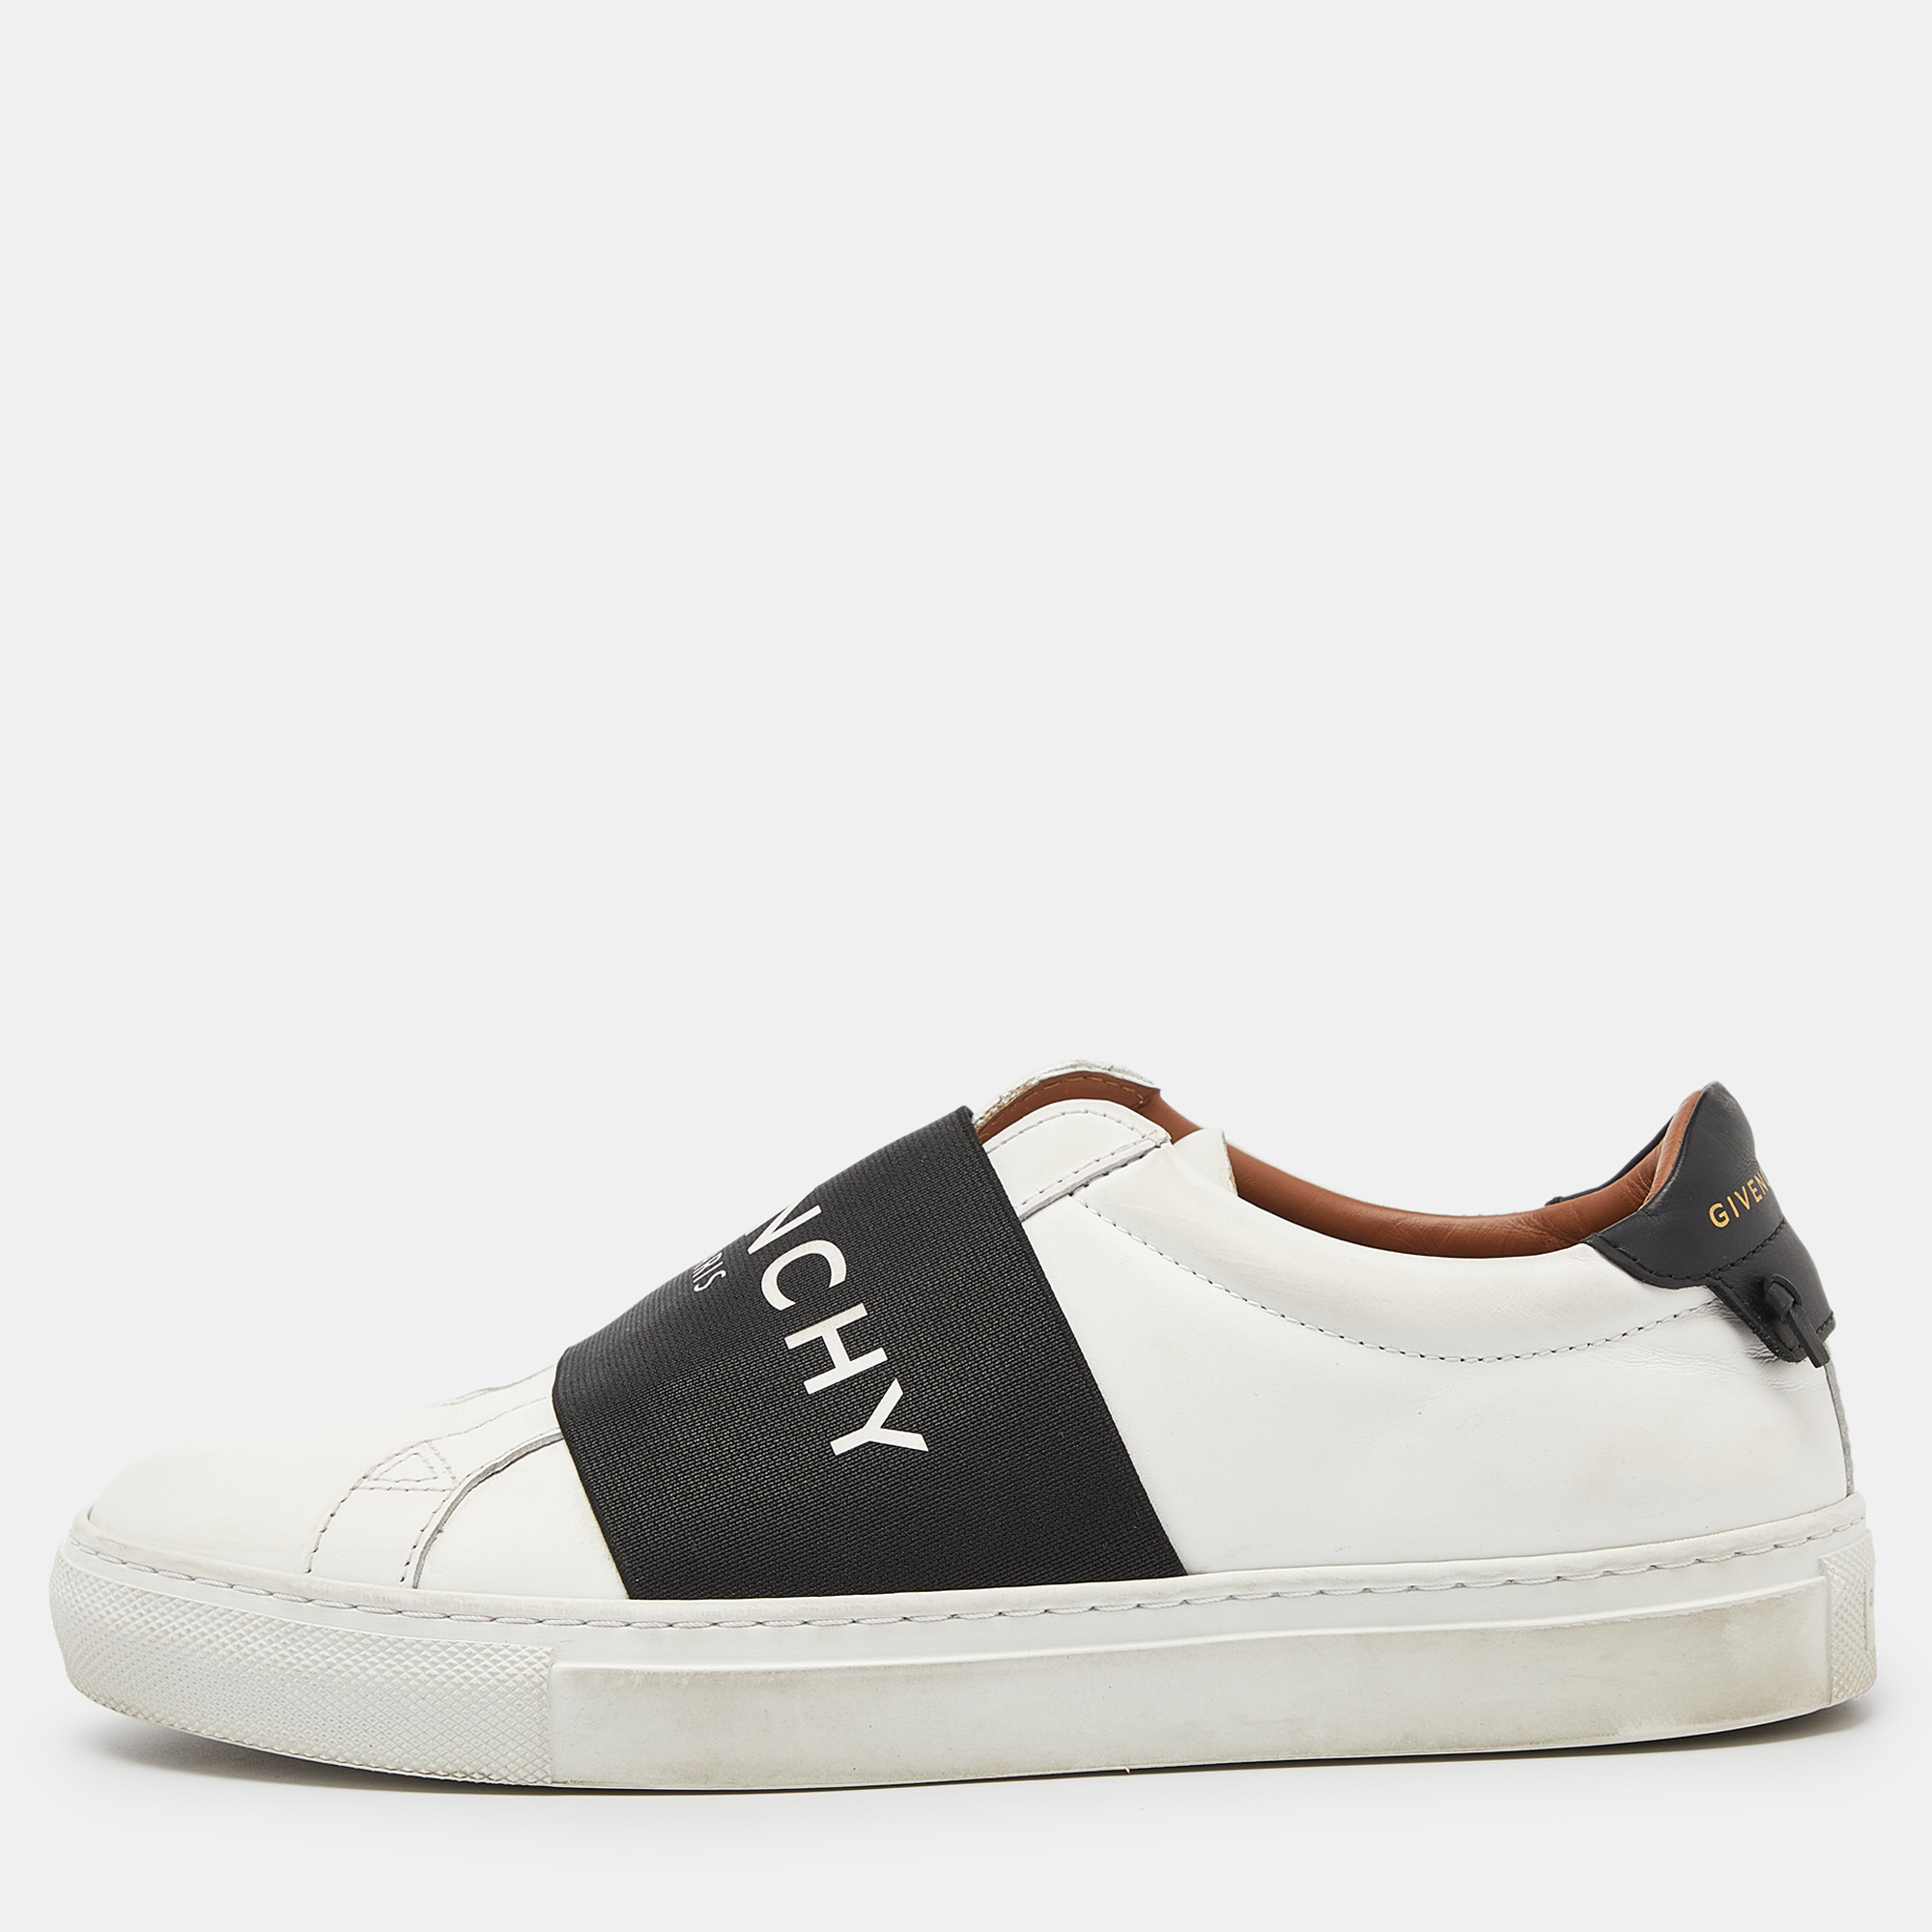 

Givenchy White Leather Urban Street Slip On Sneakers Size